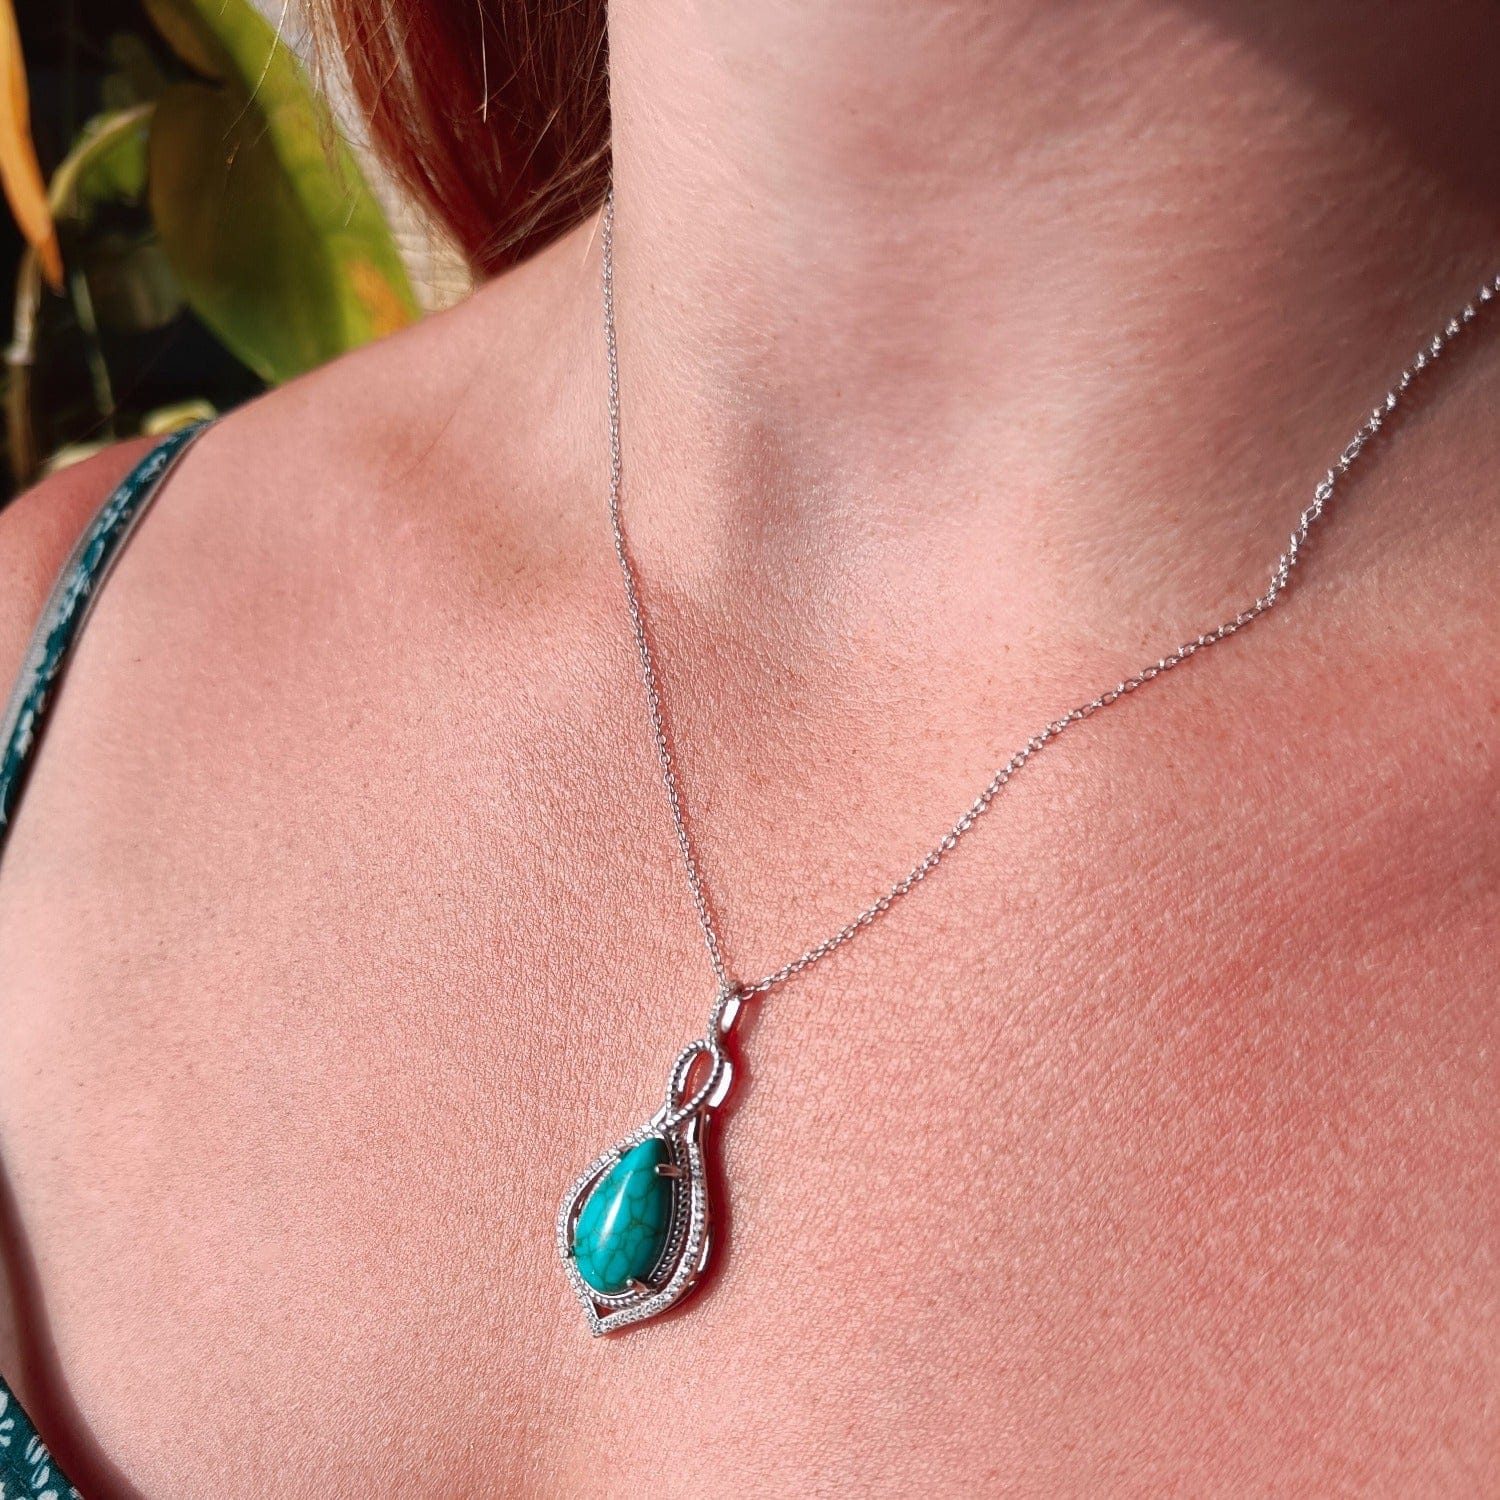 Mermaid's Turquoise Pendant Necklace featuring a turquoise stone set in S925 sterling silver zoomed in on a model with a left side view in natural sunlight